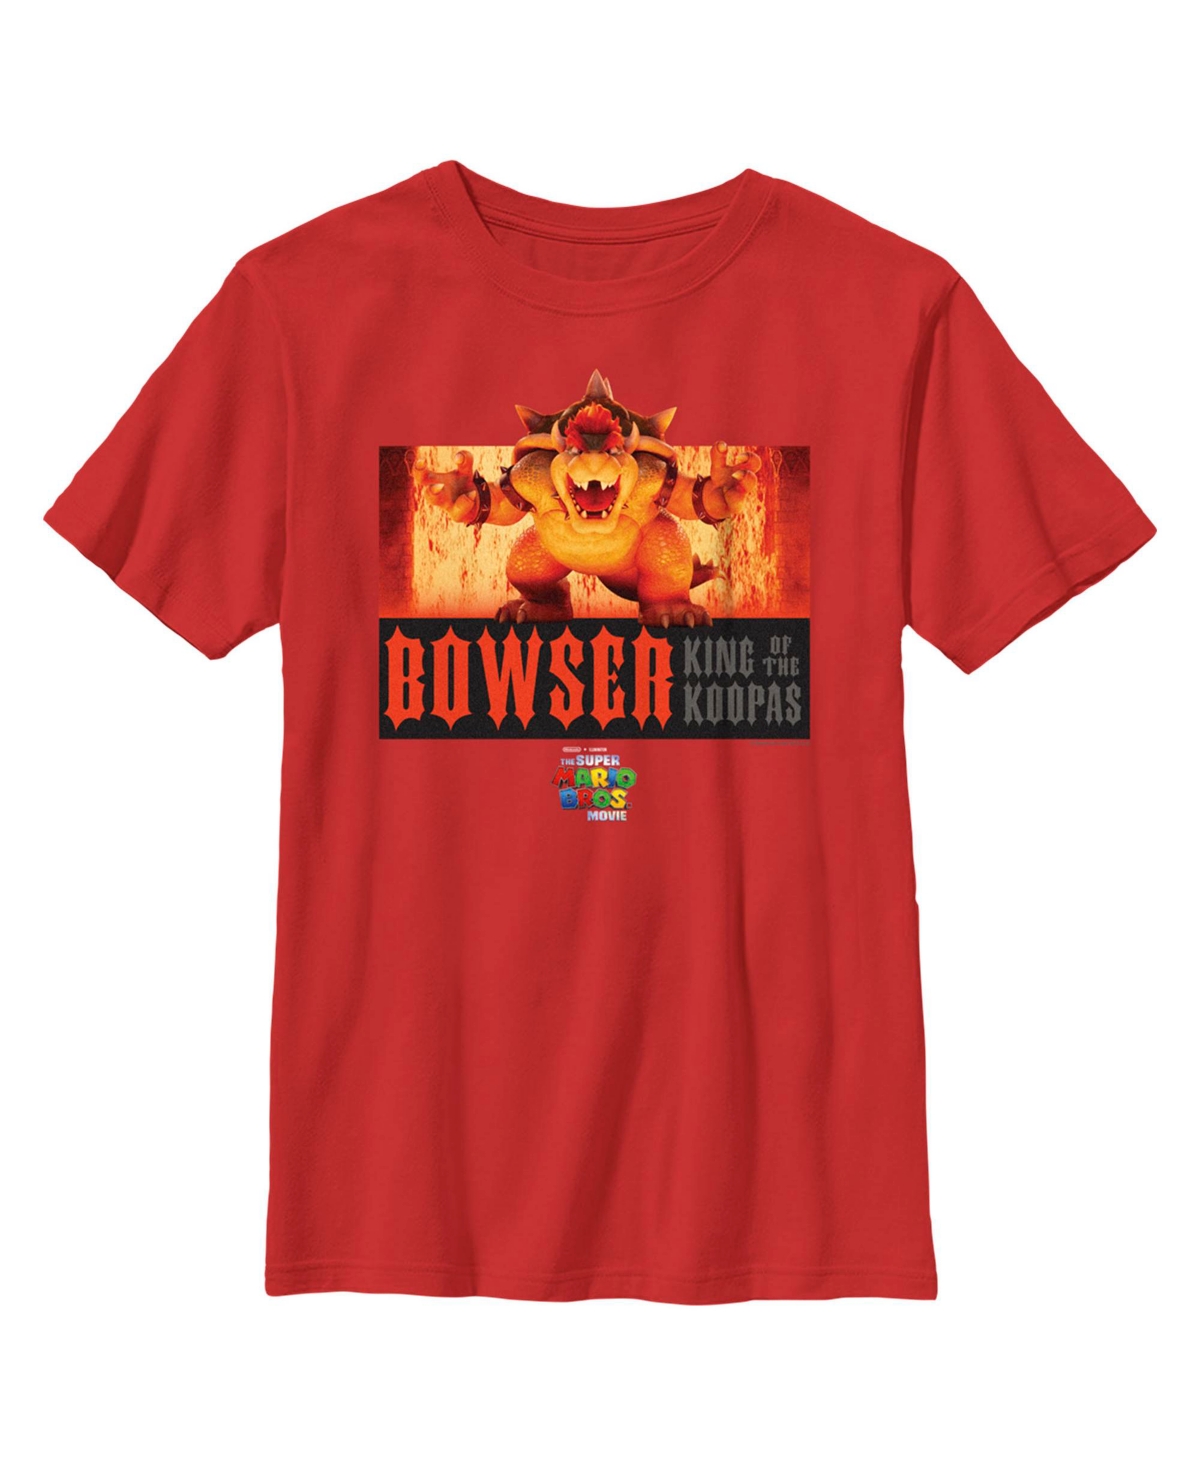 Nintendo Boy's The Super Mario Bros. Movie Bowser King Of The Koopas Fire Scene Child T-shirt In Red